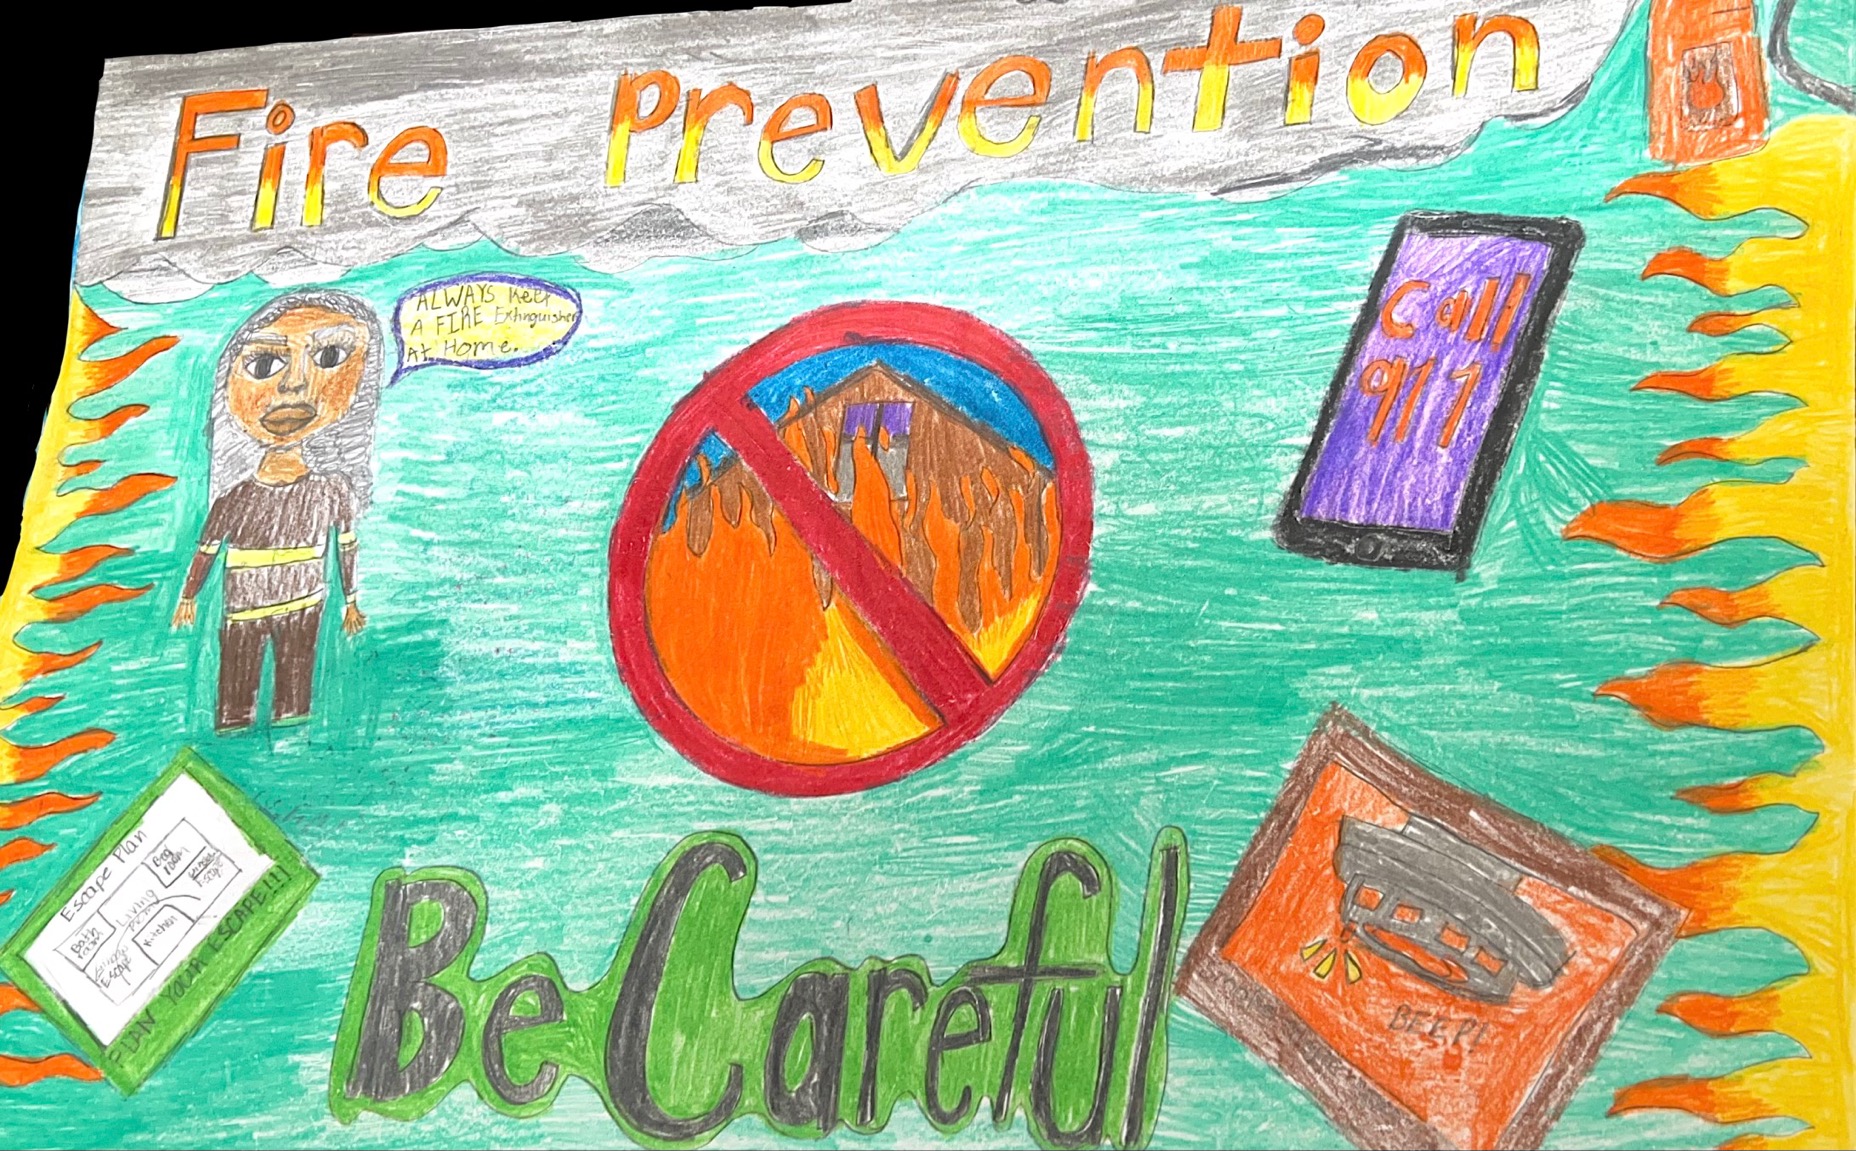 Awards Ceremony, family events planned for Fire Prevention Week | Macon ...